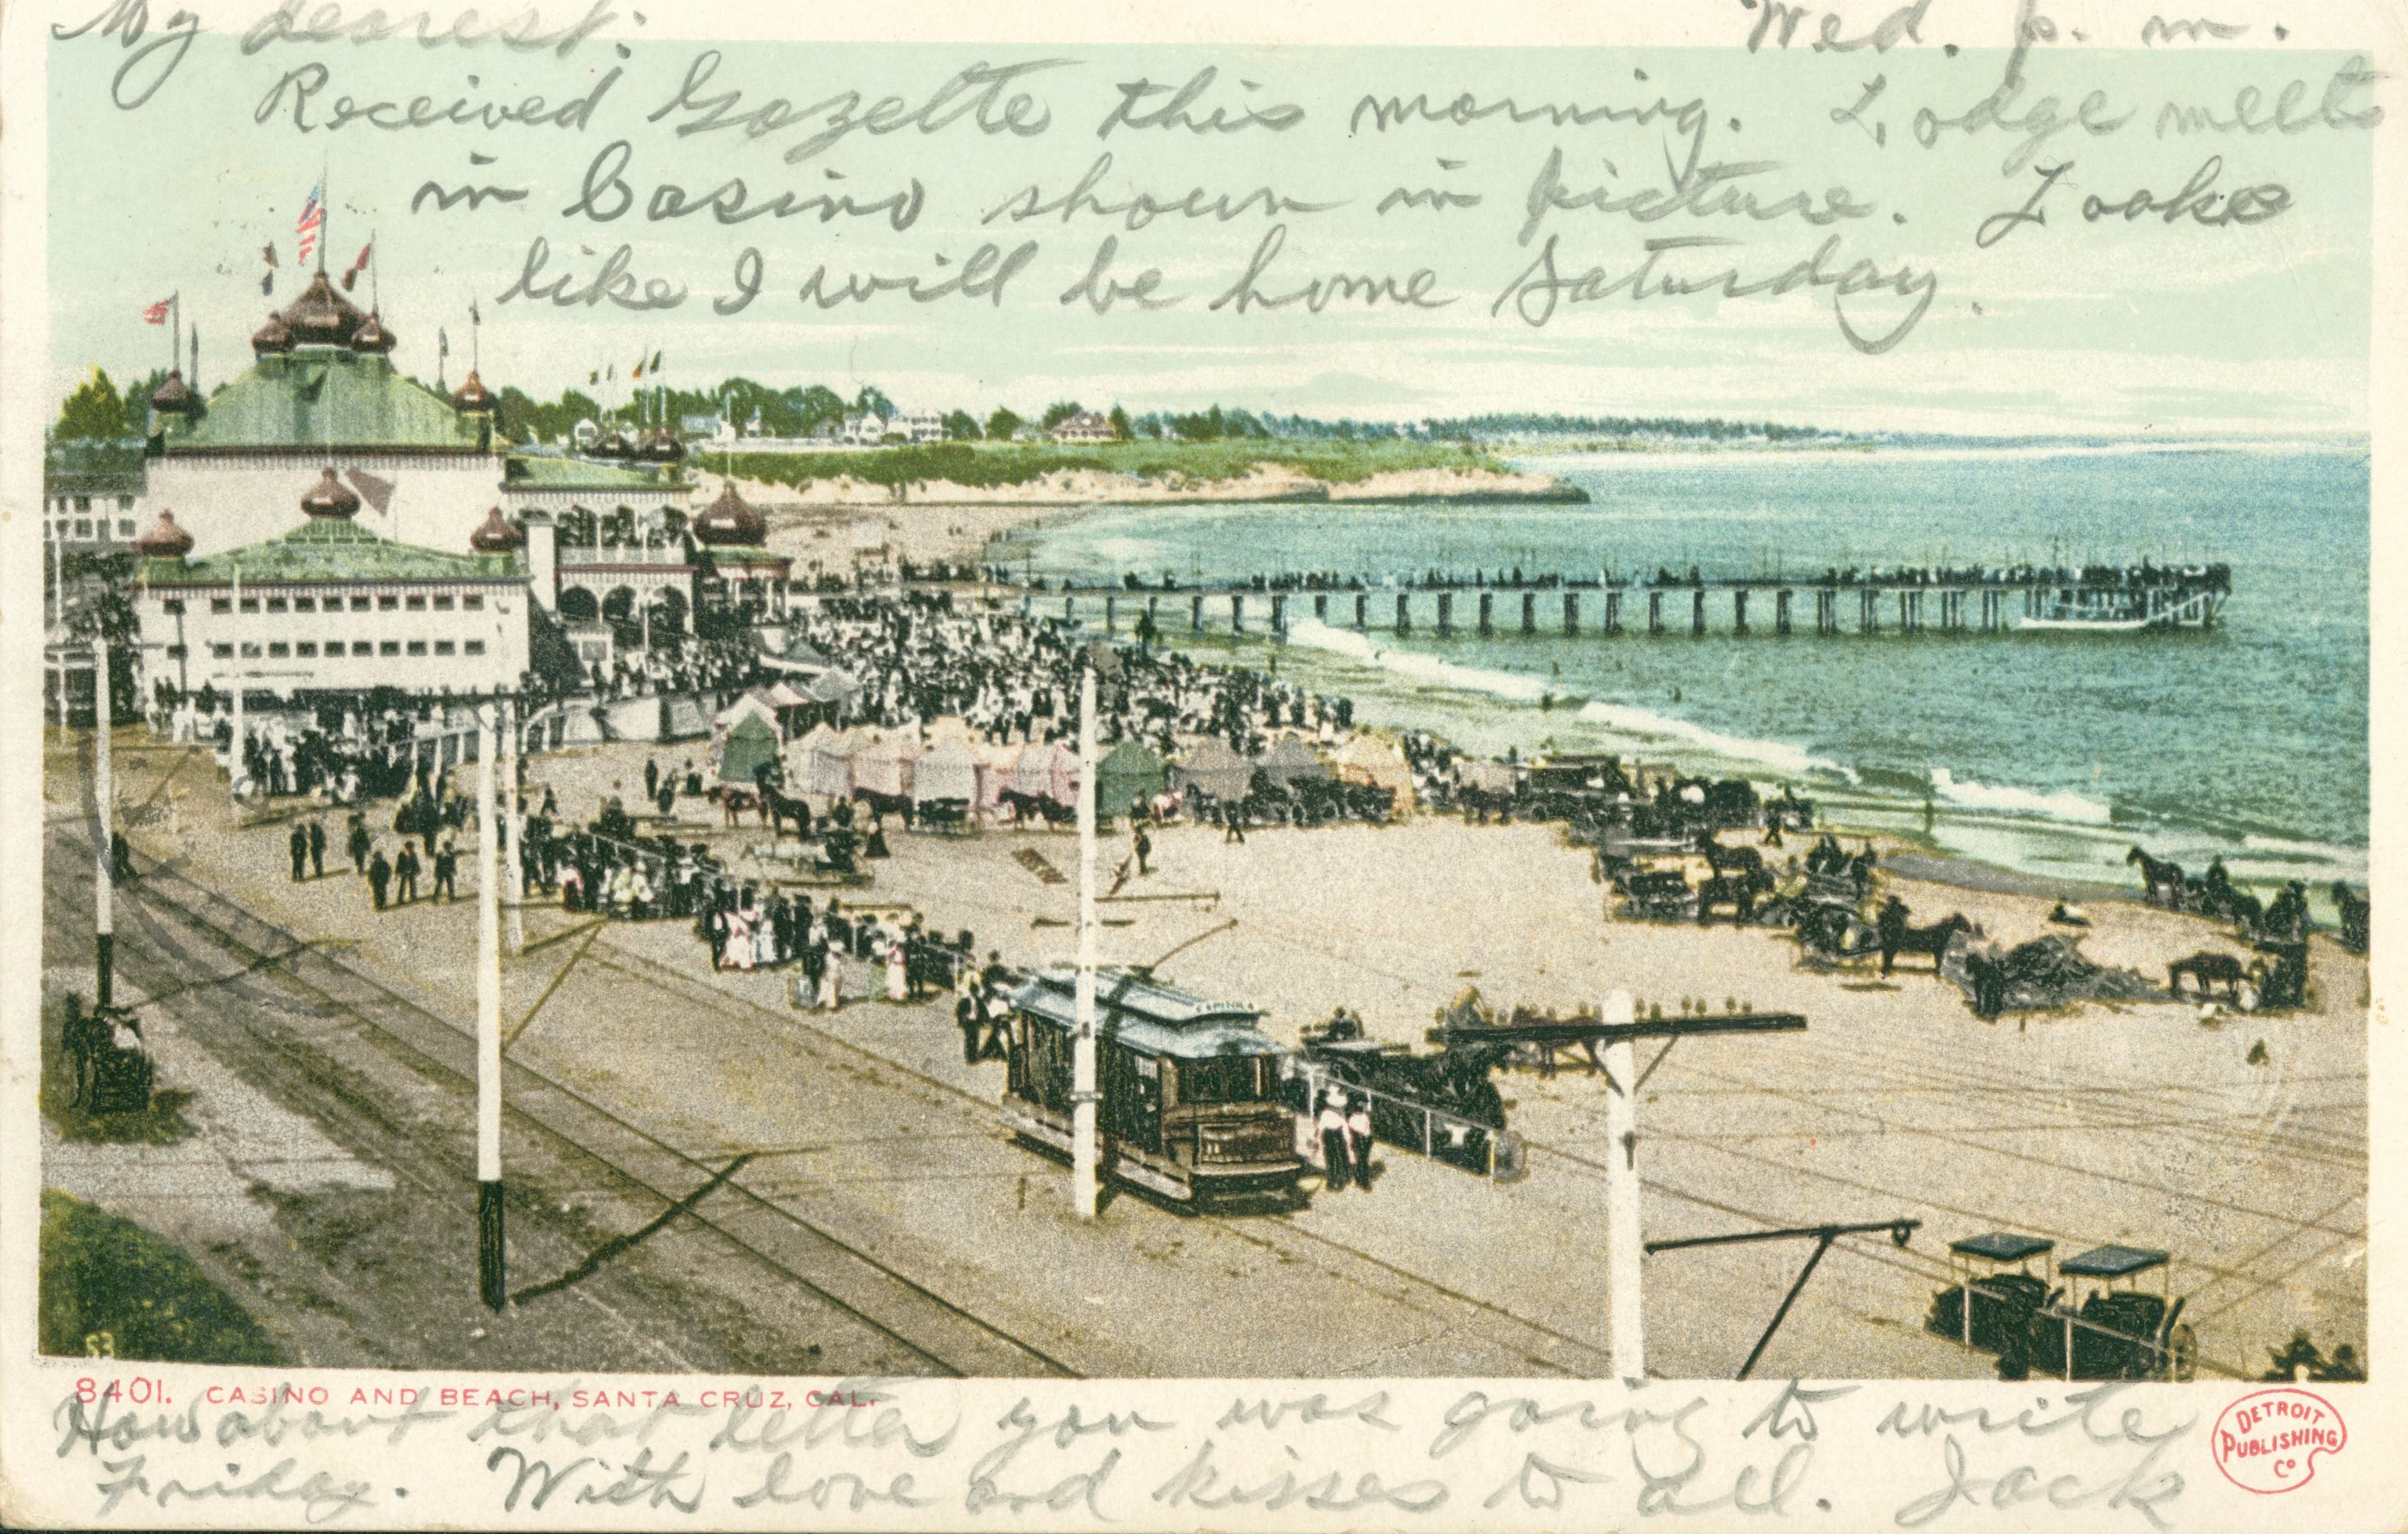 Ocean view Overhead view of casino and structures, beach view with tents, horses and carts, people, electric trolley, pier, Santa Cruz coastline